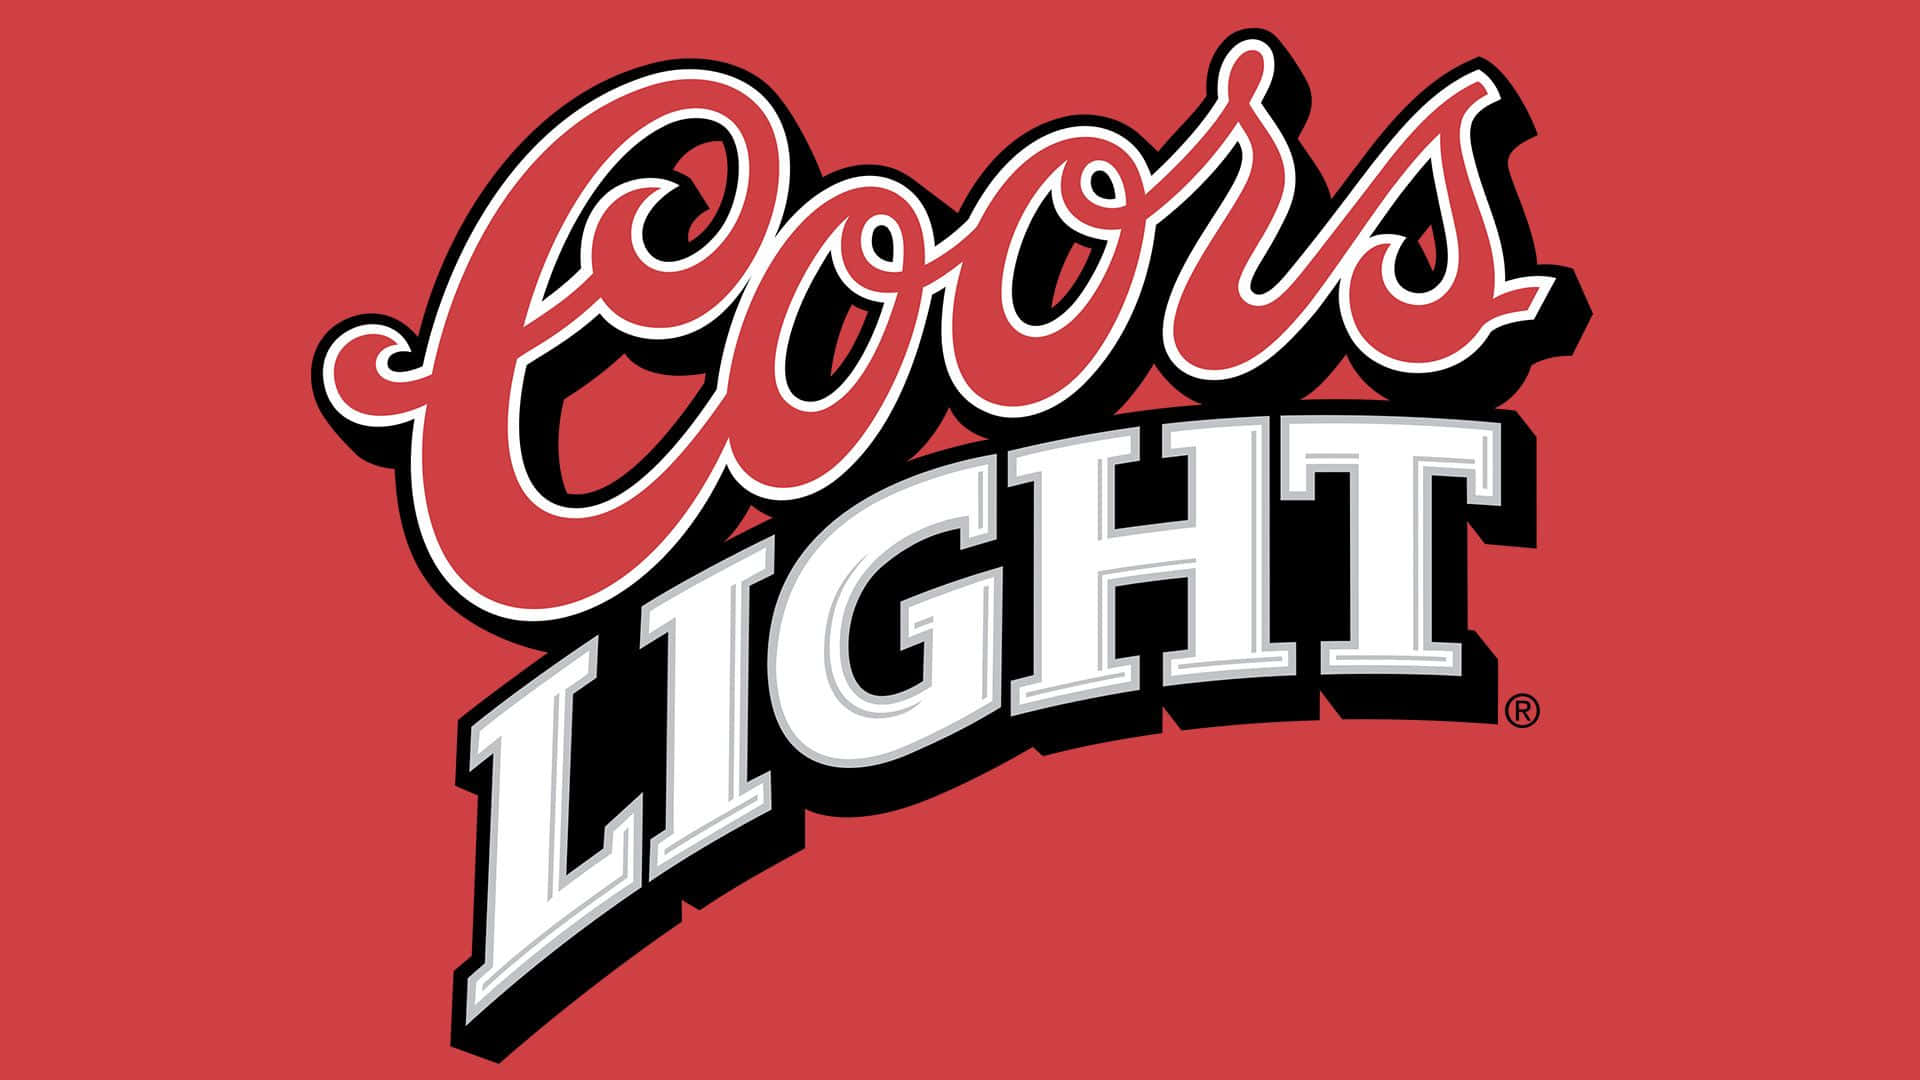 Coors Light Keeps You Refreshed Wallpaper